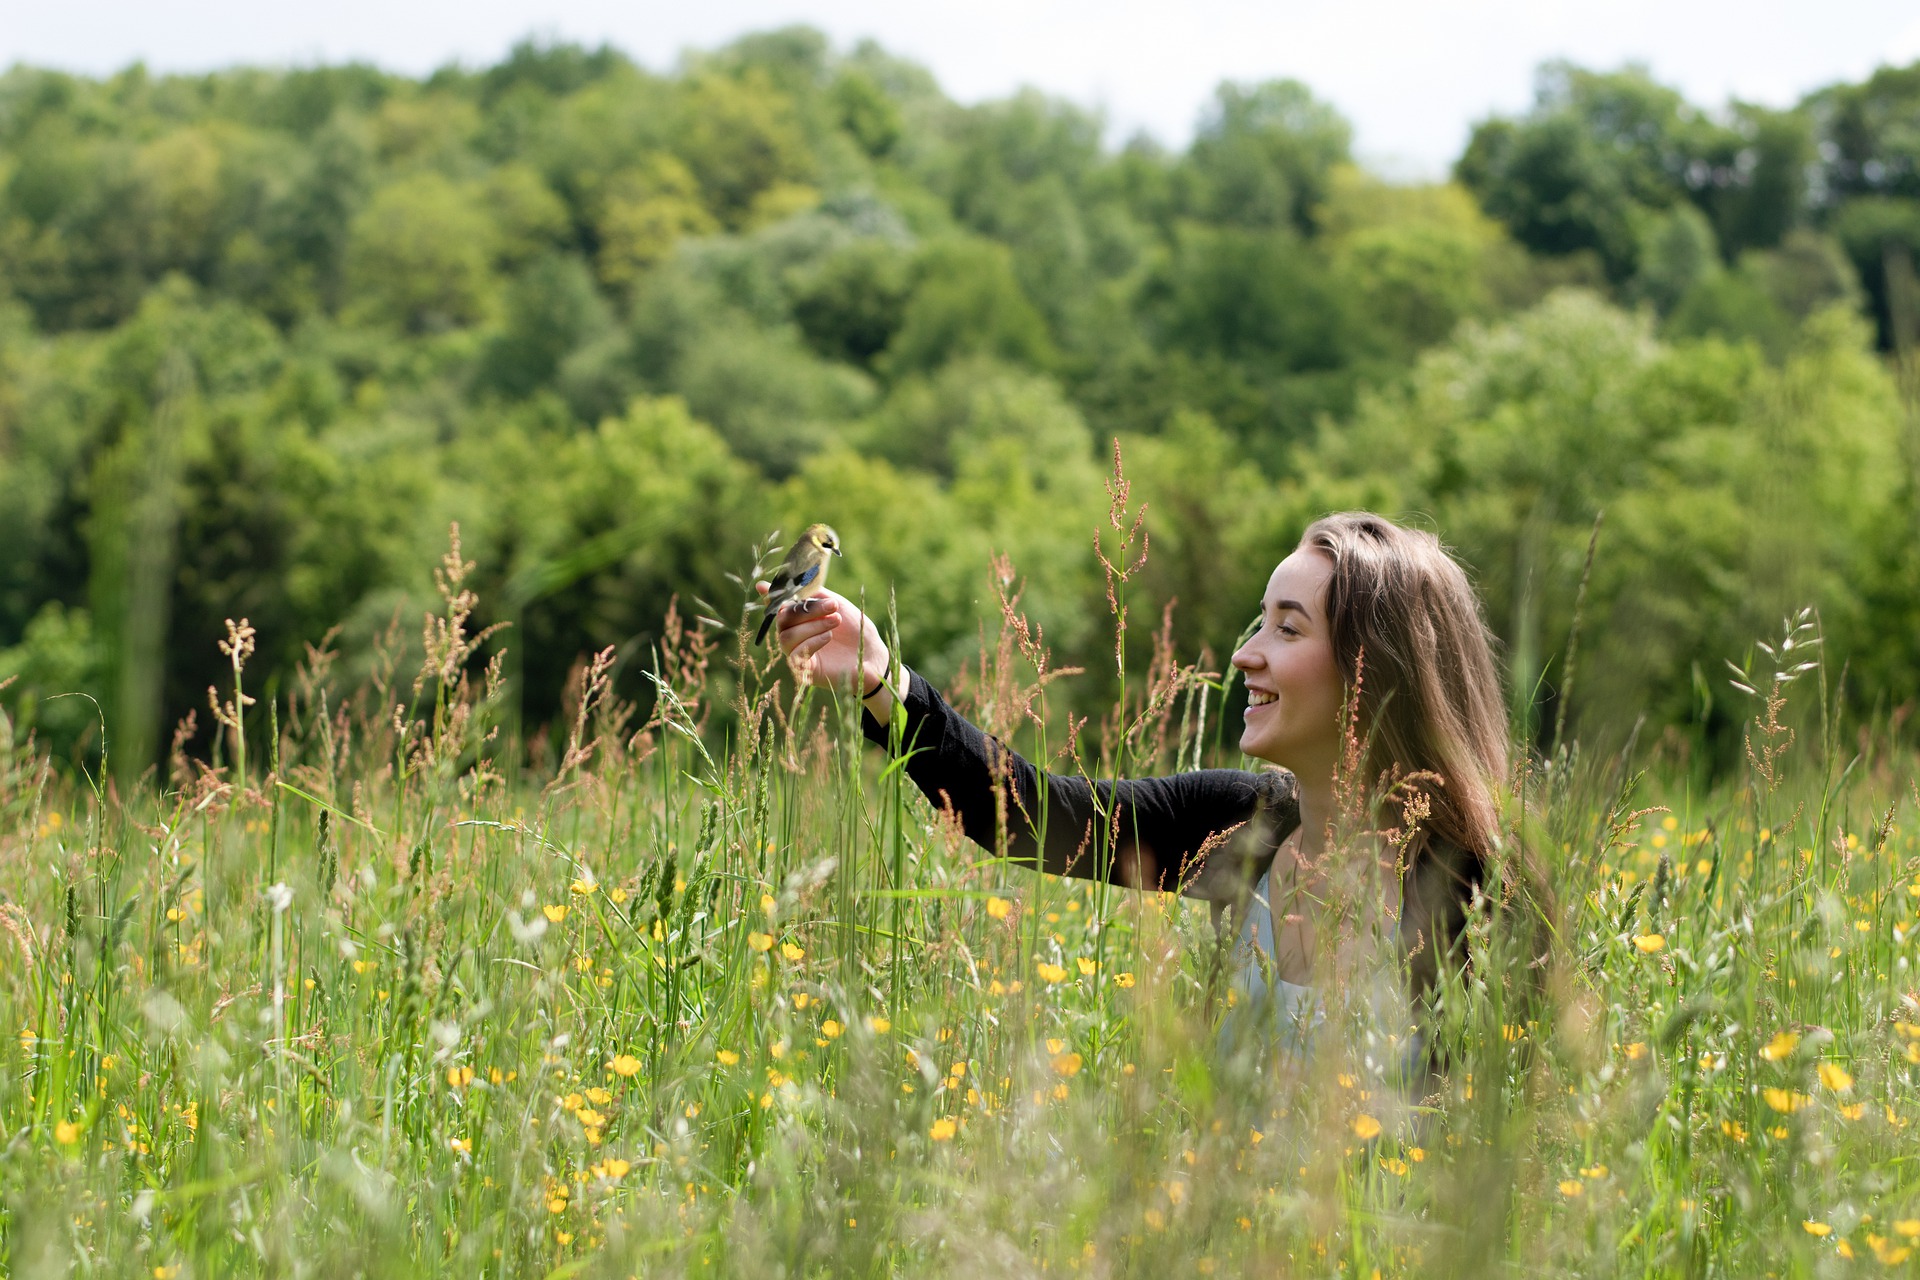 A bird alights on the hand of a smiling young woman in a meadow.